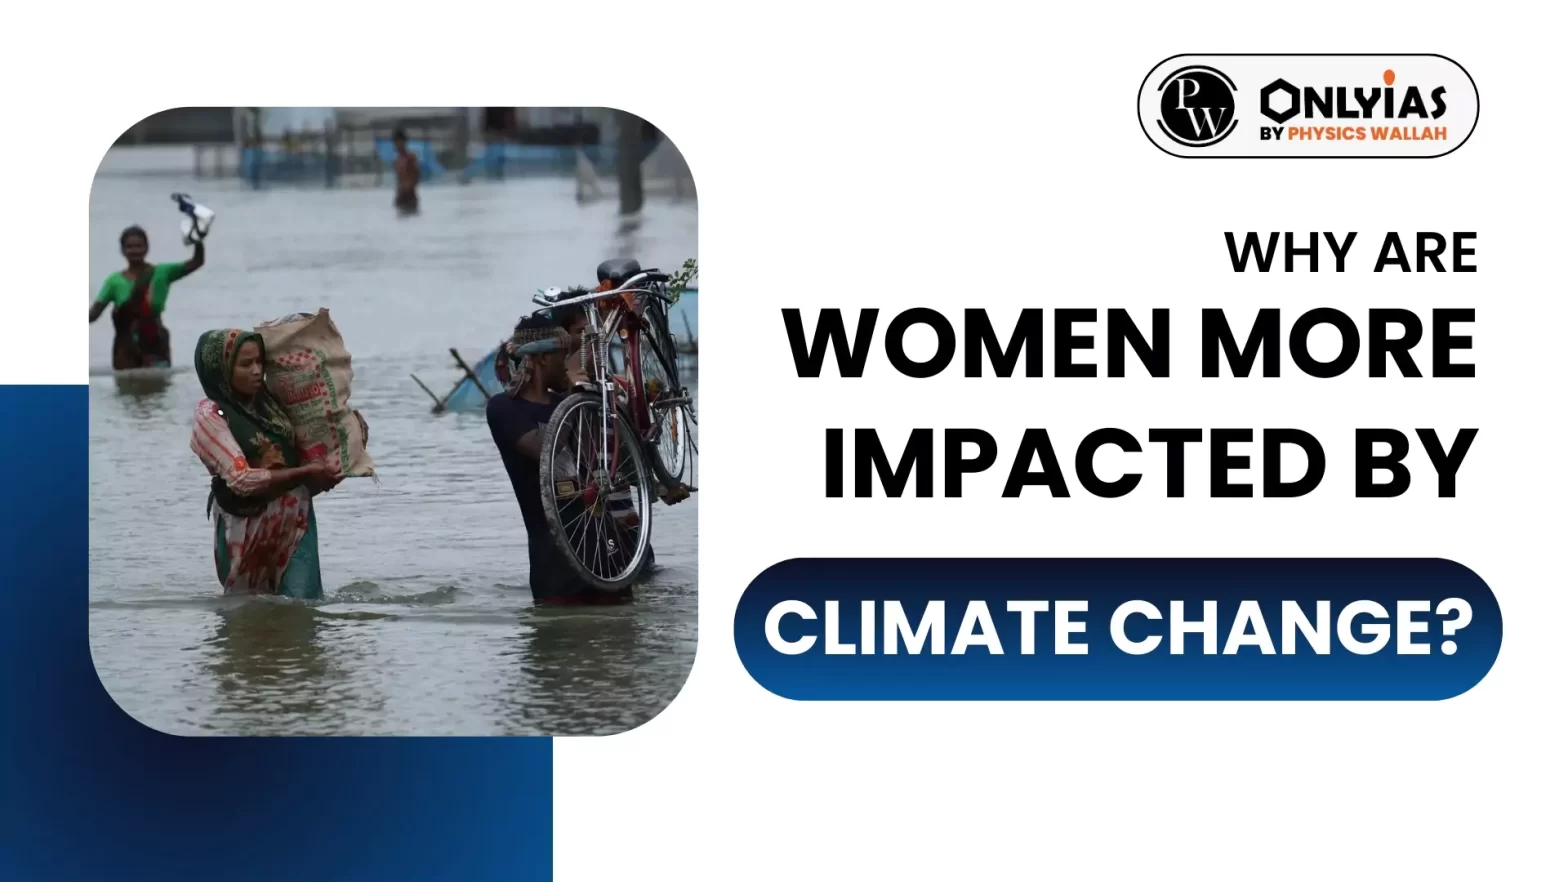 Why Are Women More Impacted by Climate Change?